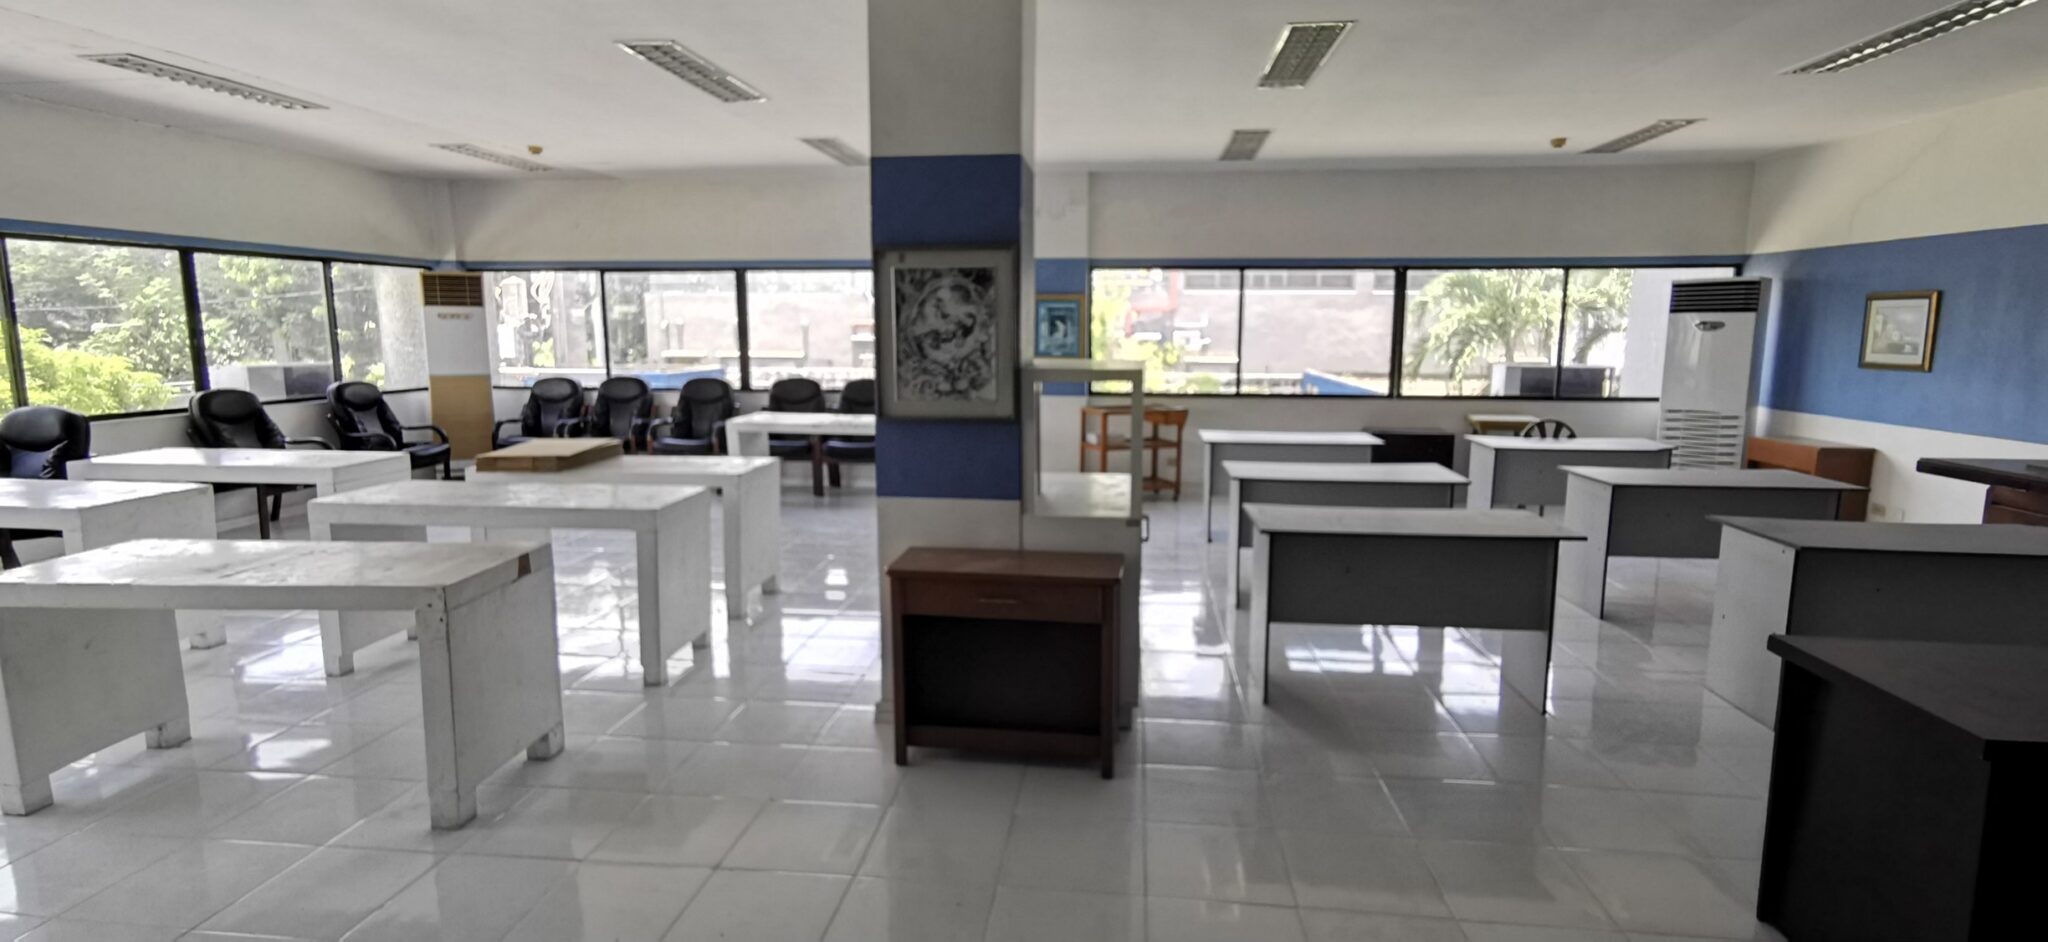 Meridien Industrial Park, Silang, Cavite – Office Warehouse for Sale‼️